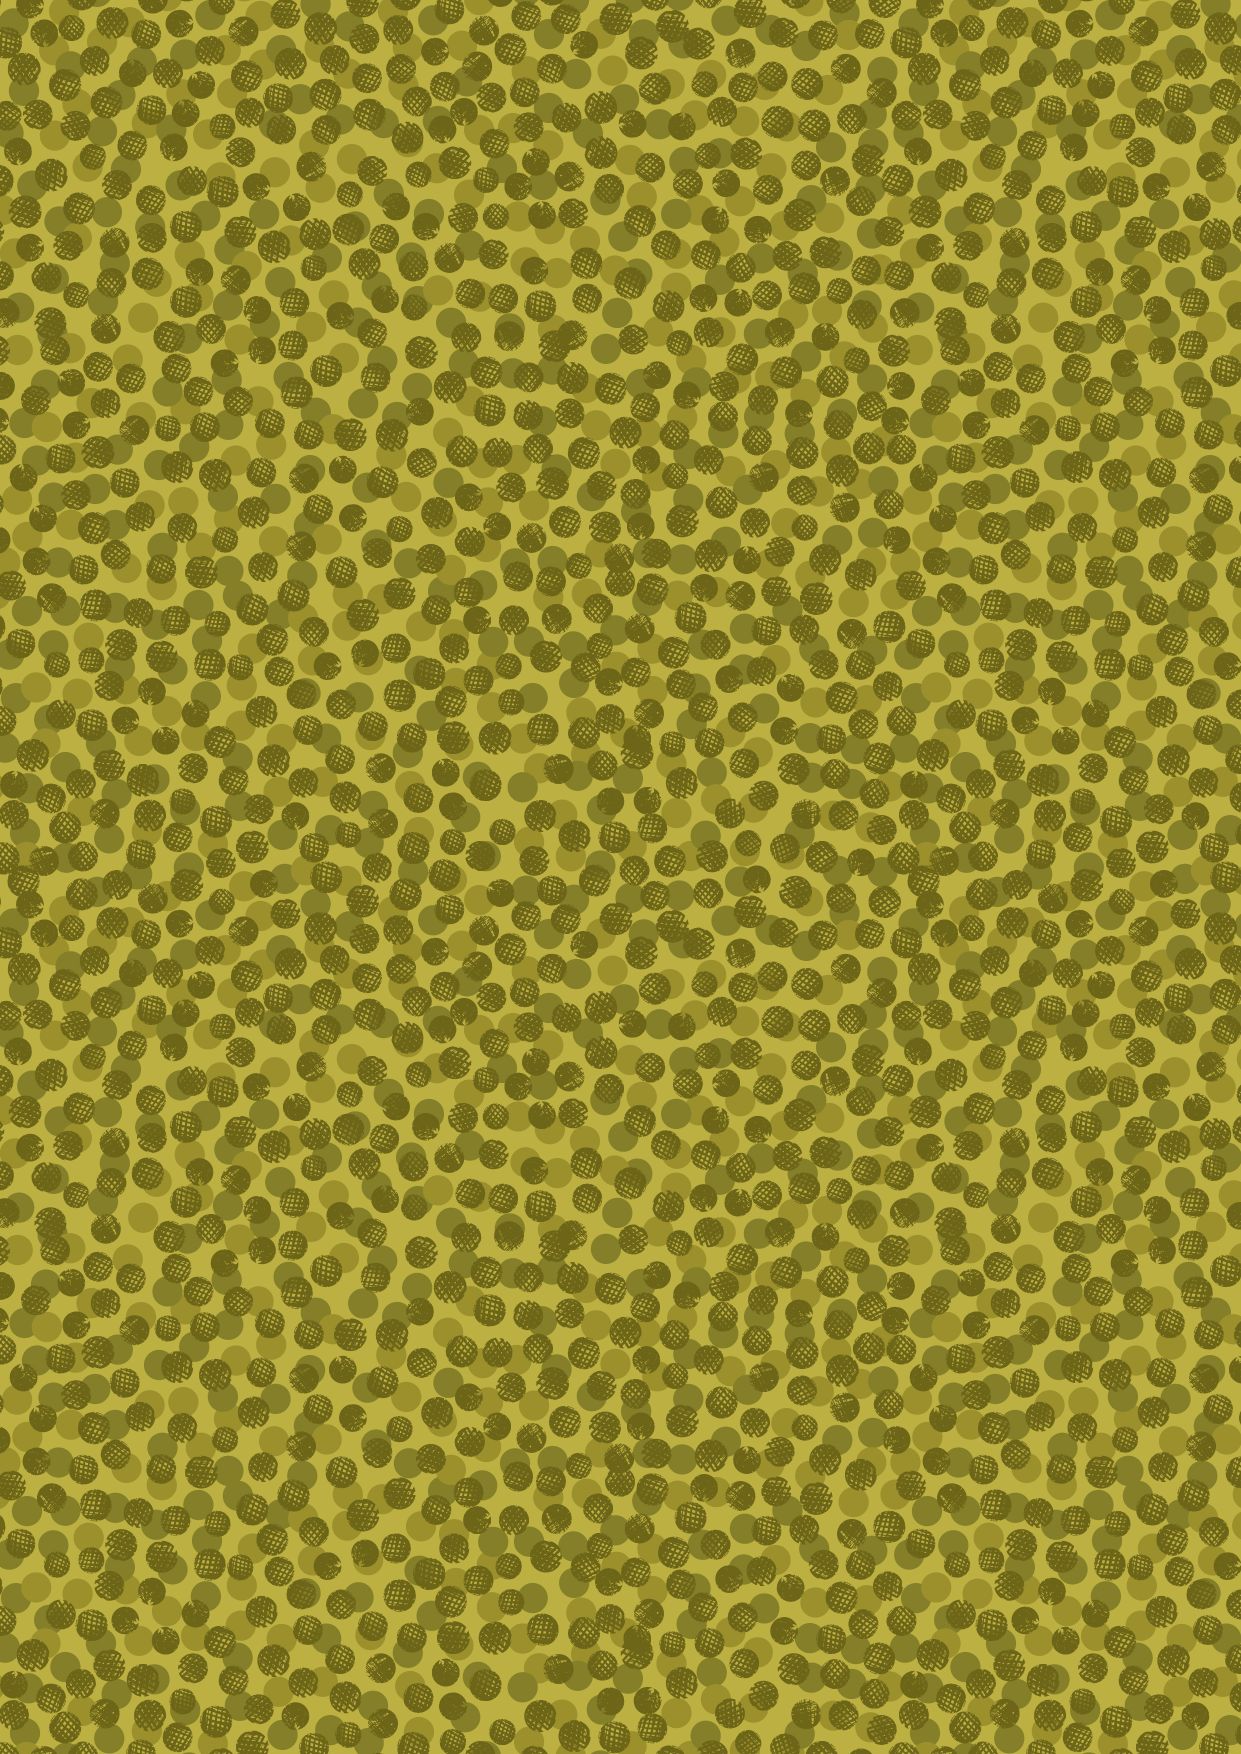 Lewis & Irene - The Orchard - A496.2 Green Abstract Berries Fabric